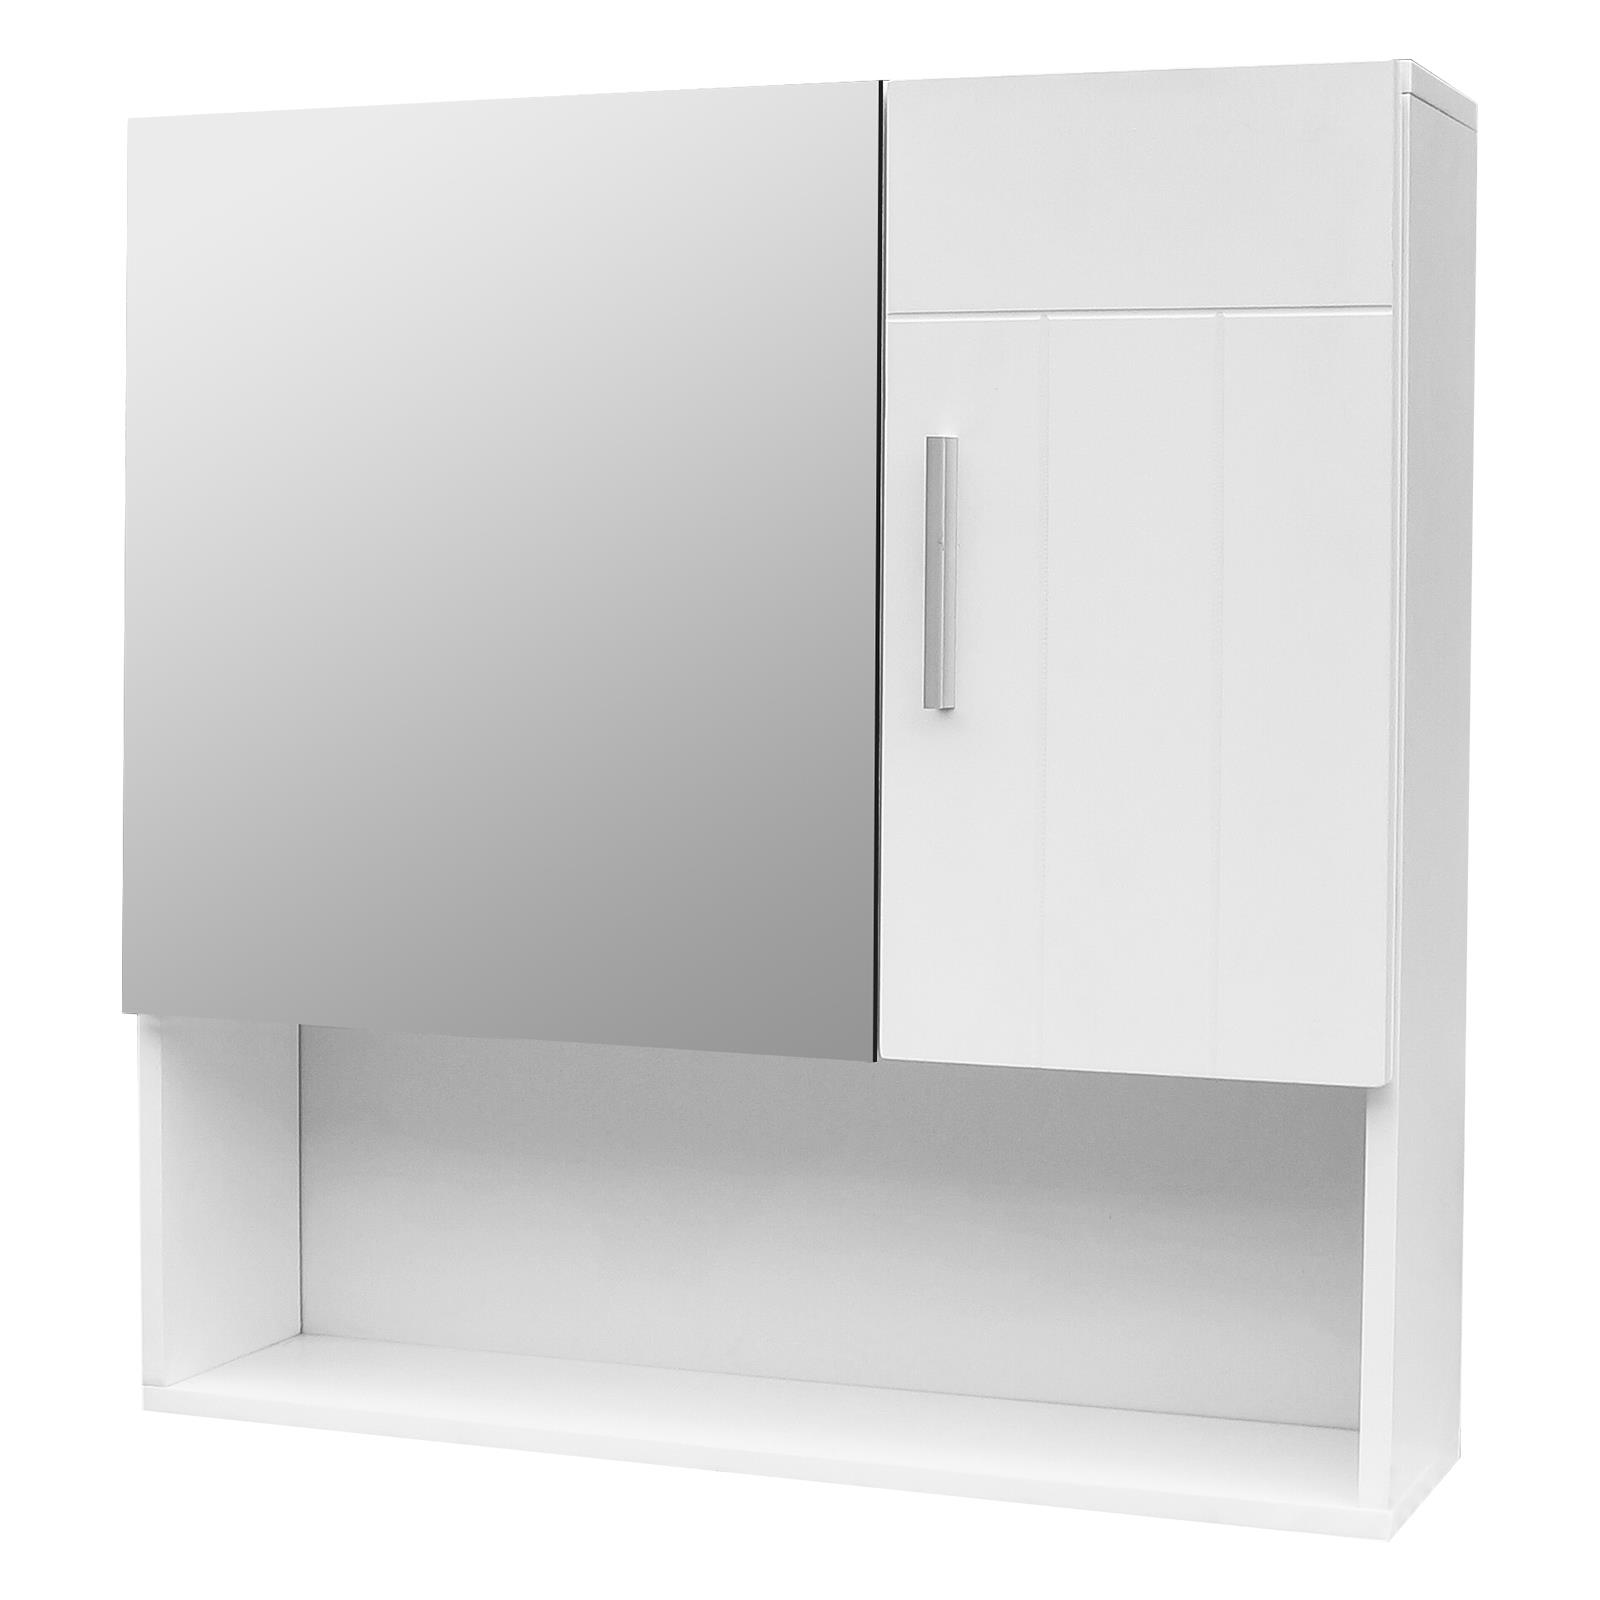 SalonMore Mirror Cabinet, Mirrored Storage Wall Cabinet, Wall Mounted Medicine Cabinet with Mirror Doors & Shelf Bathroom White - image 3 of 5